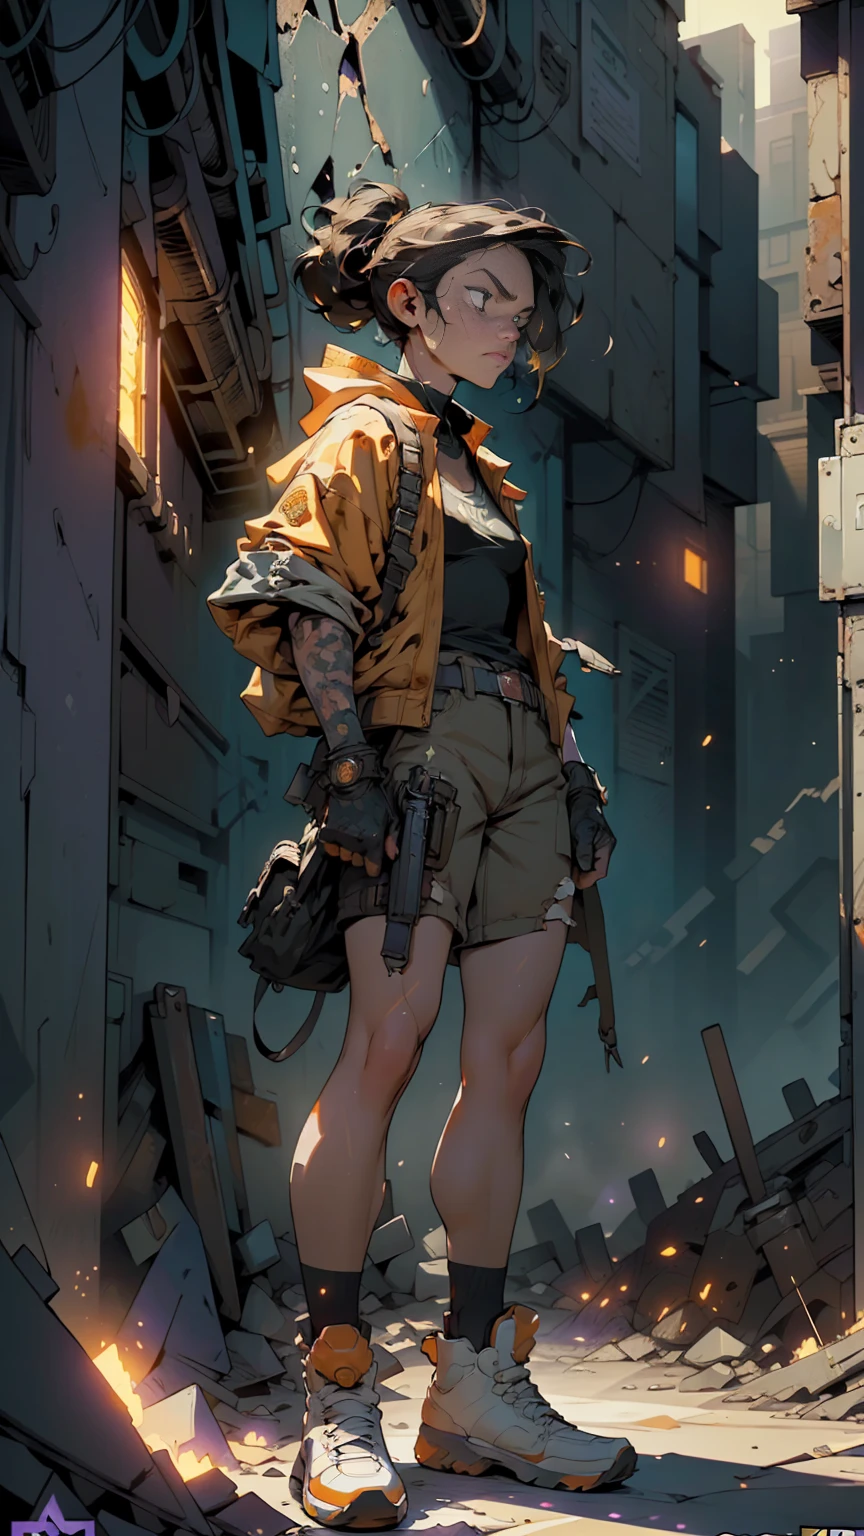 dark and torn, 1 young man, beautiful muscular body, fierce expression, holding a gun, (colors on his clothes, warm, orange, yellow, violet: 1.3), standing on a desolate terrain, dramatic lighting, intense shadows, sandy texture , high contrast, vibrant colors, dynamic pose, powerful stance, rough background, explosive atmosphere, dystopian theme, surreal elements, digitally painted illustration, HD resolution, intricate details, dramatic composition, avant-garde and chaotic brush strokes, gothic style, intense emotions, Scale epic, raw and gritty feel, captivating and provocative artwork.